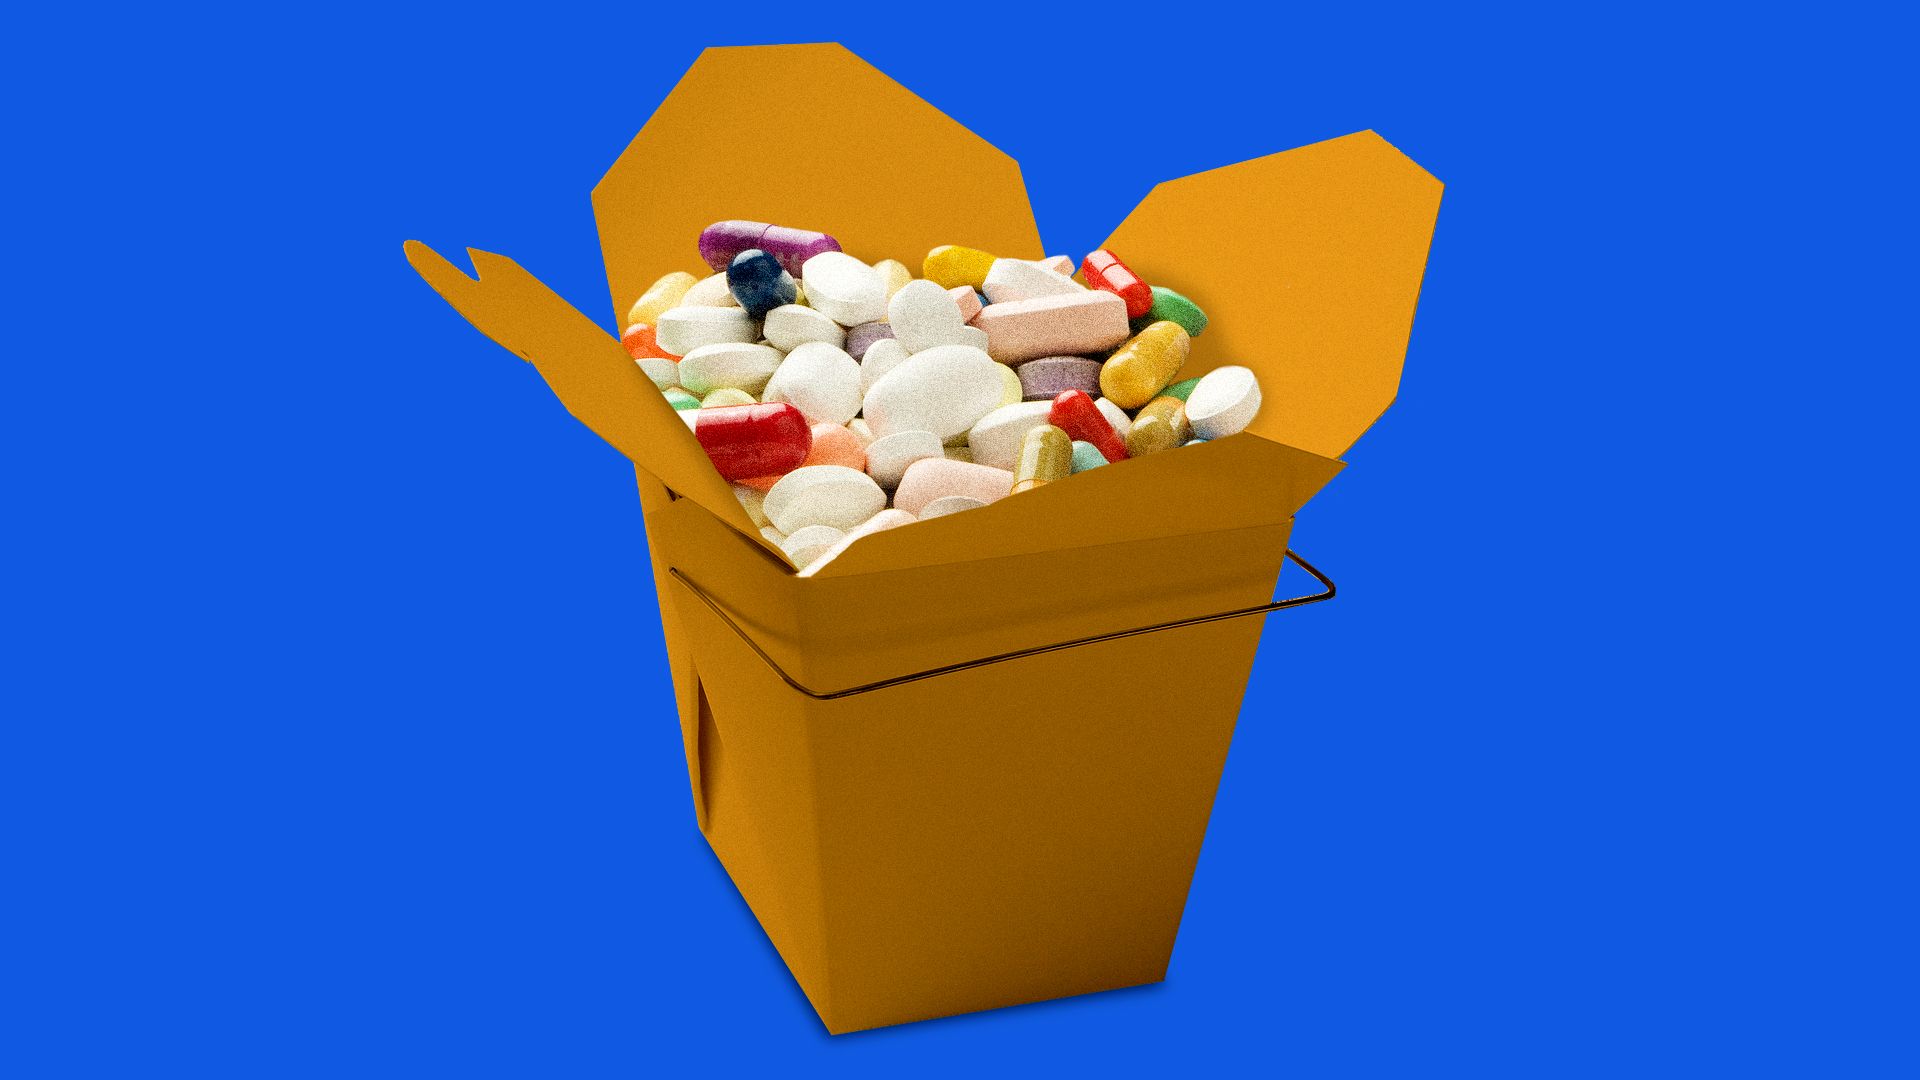 Pills in a Chinese takeout container